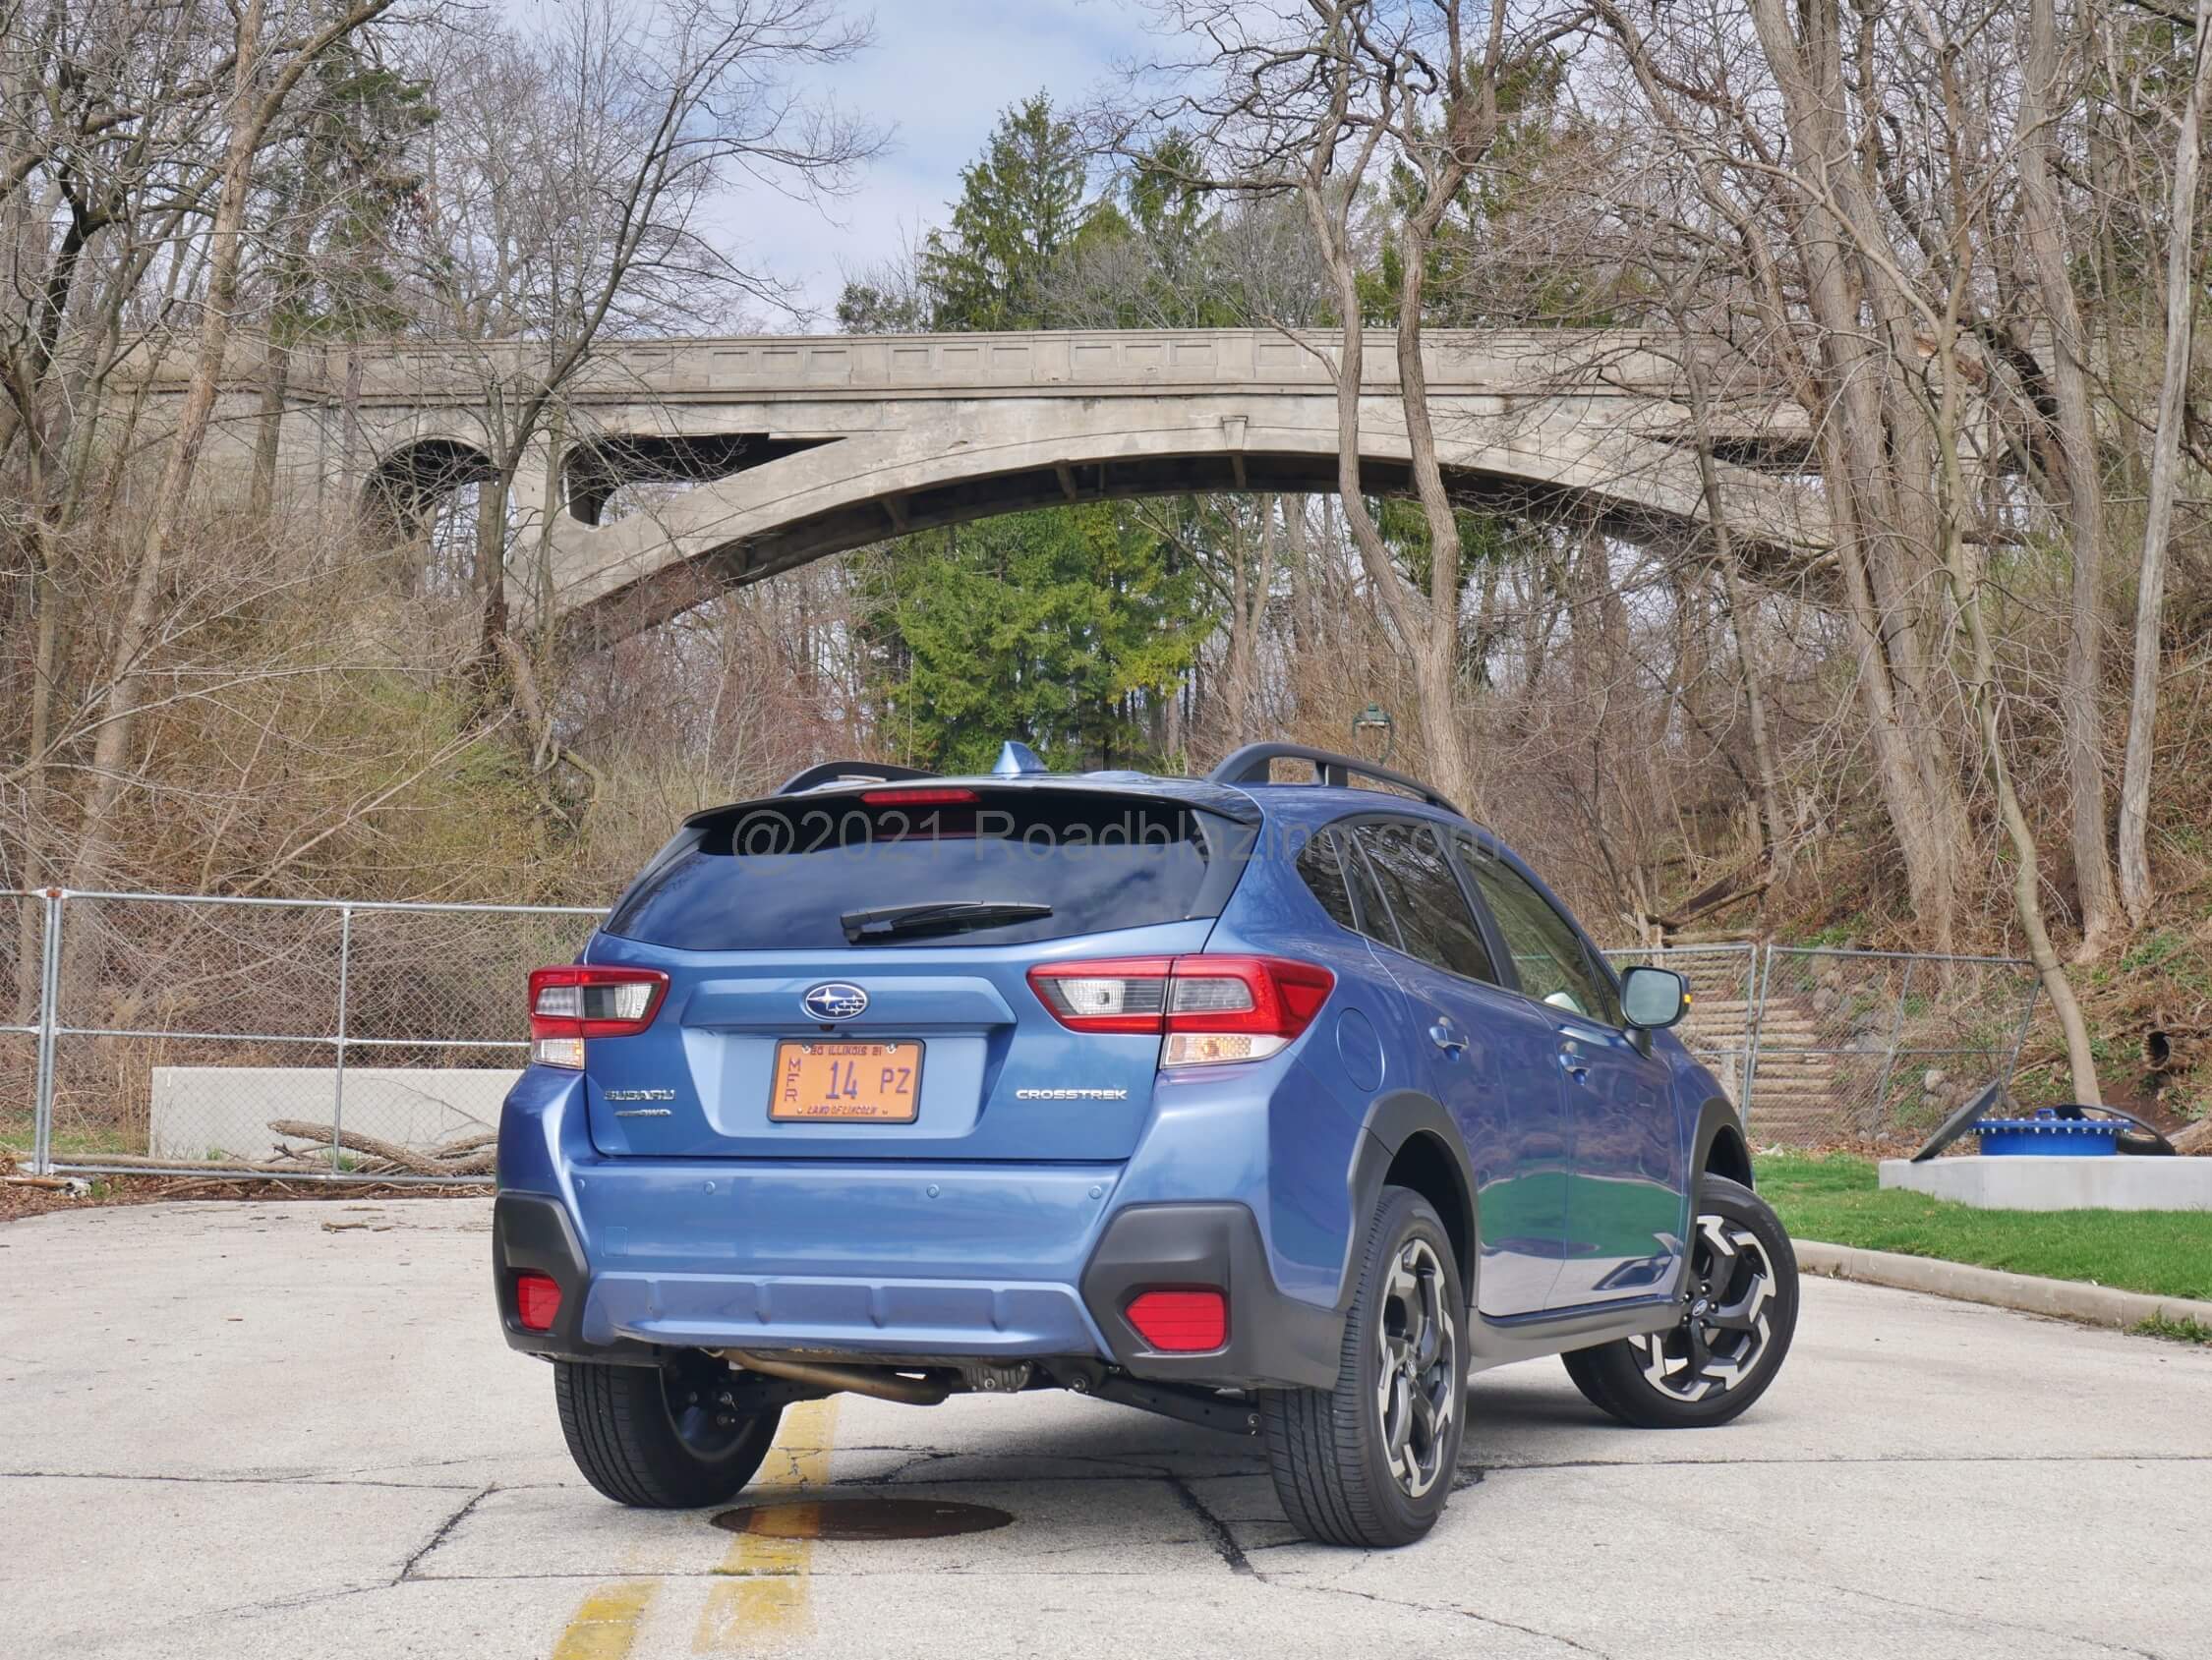 2021 Subaru Crosstrek Limited 2.5L: dark lower bumper corner cladding accentuates rear quarters while thinner wrap-around taillamps are adopted.